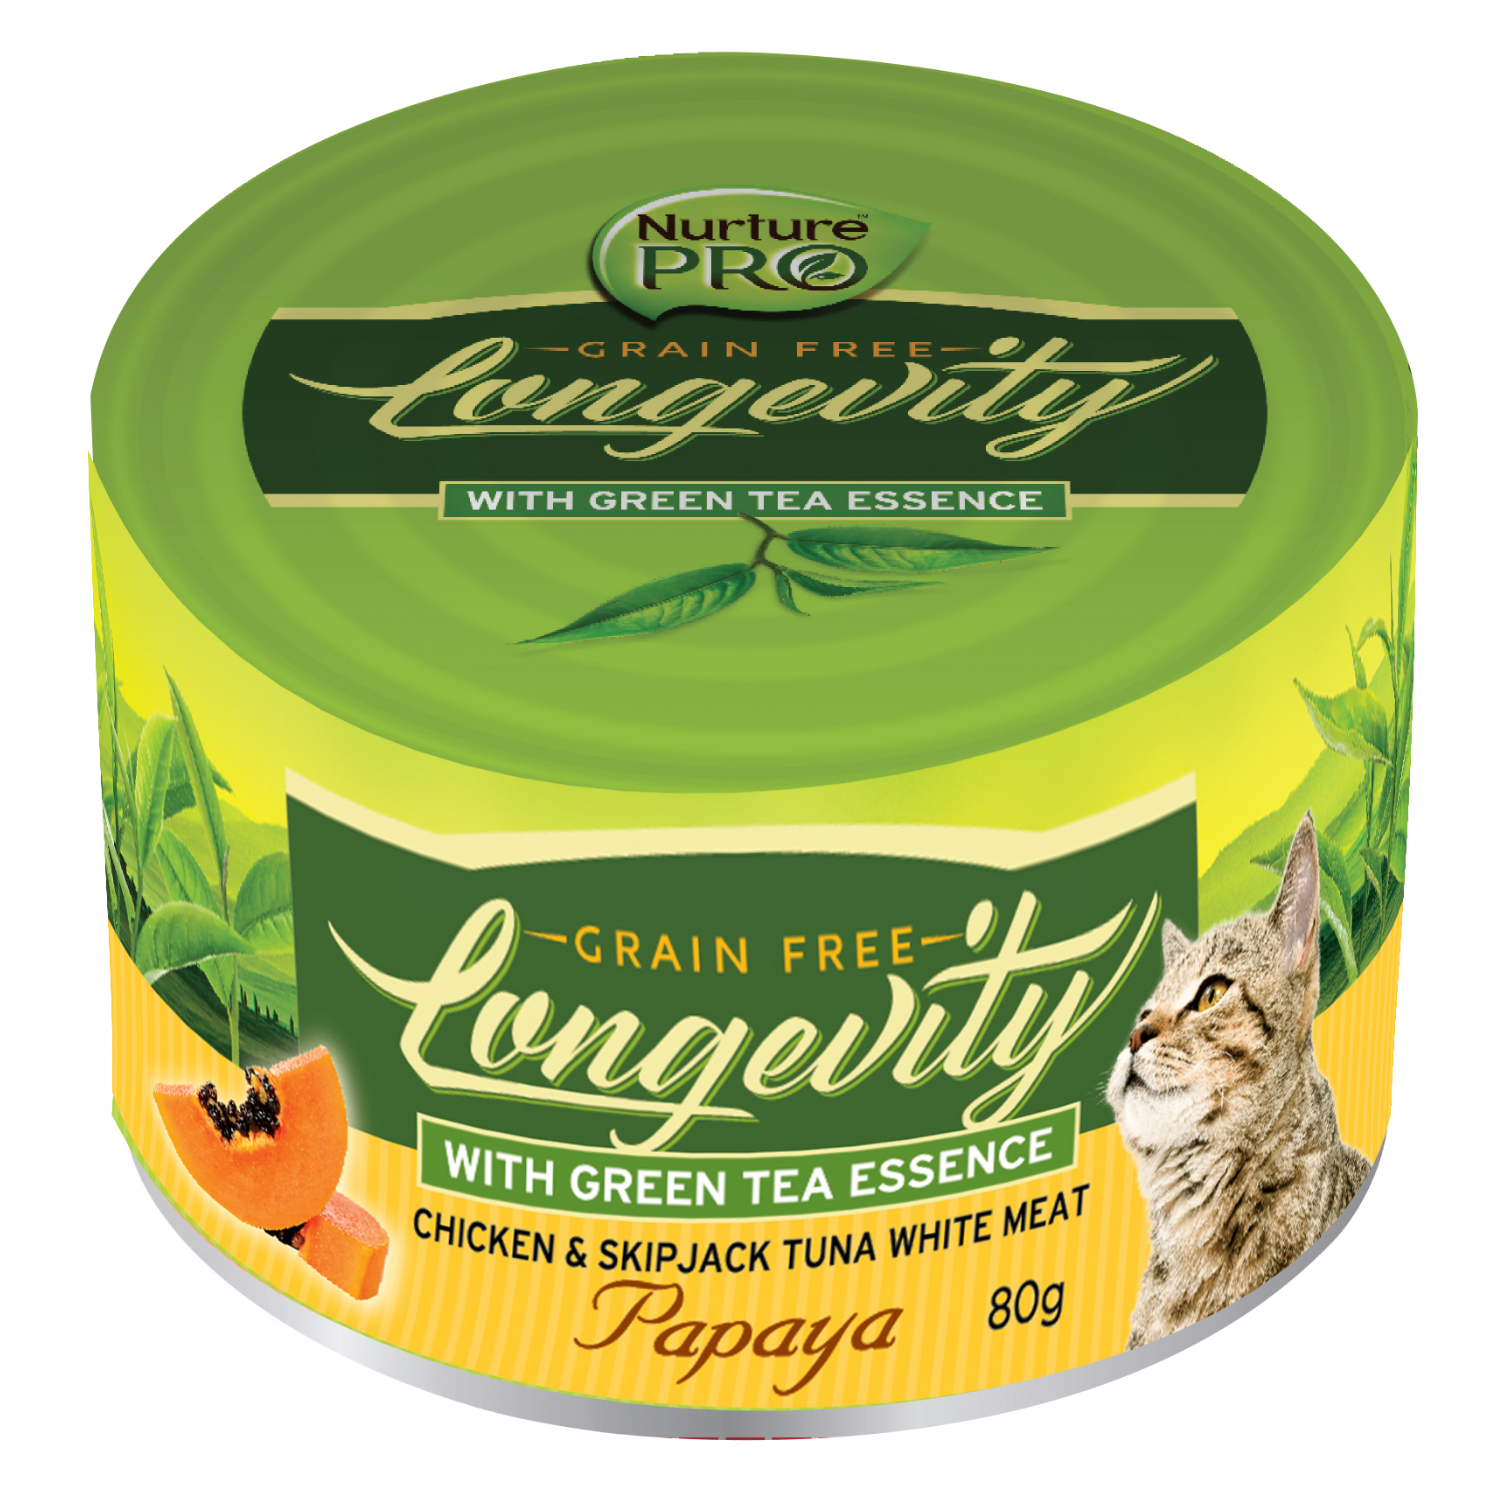 Nurture Pro Longevity Chicken and Skipjack Tuna Meat with (Papaya and Green Tea) Essence - 12 / 24 Cans